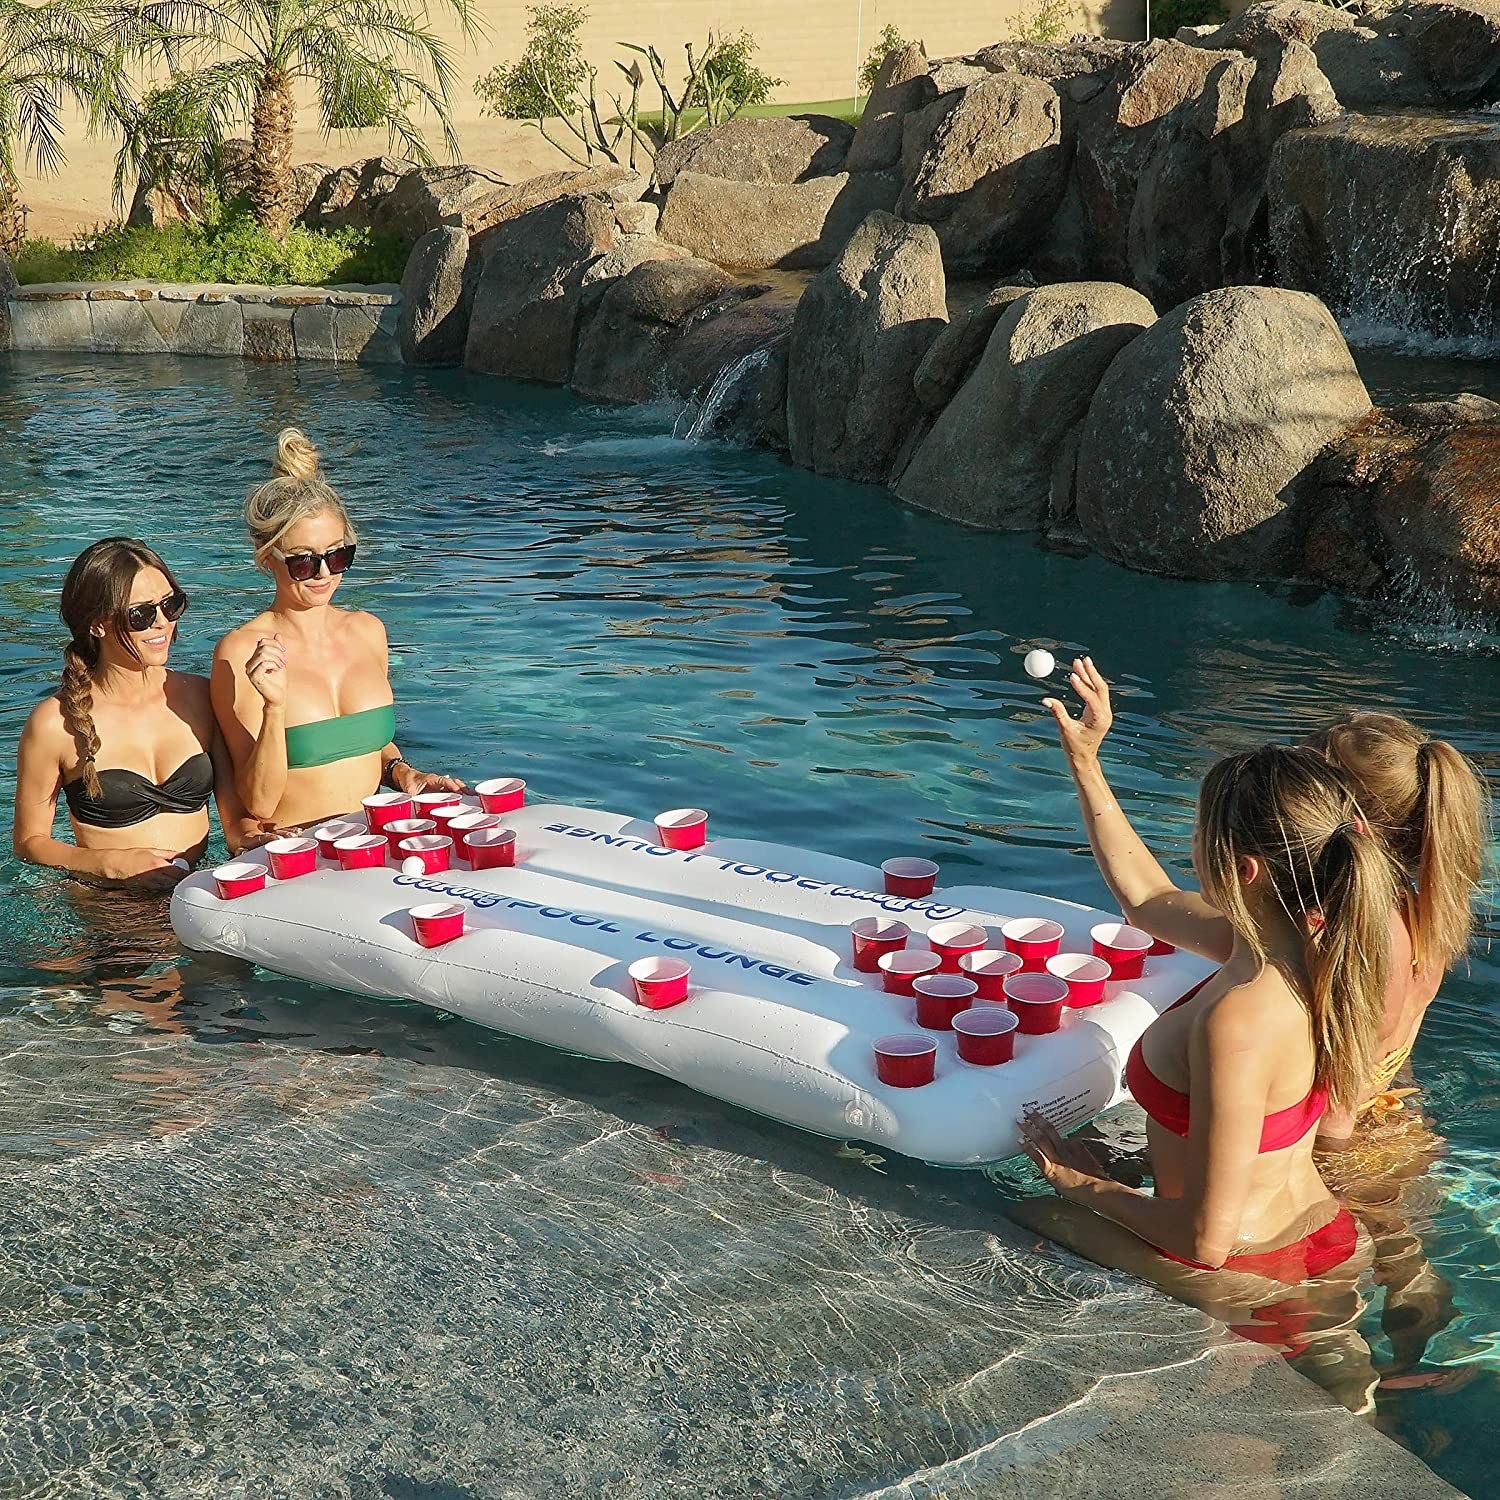 Models in the water with the beer pong float